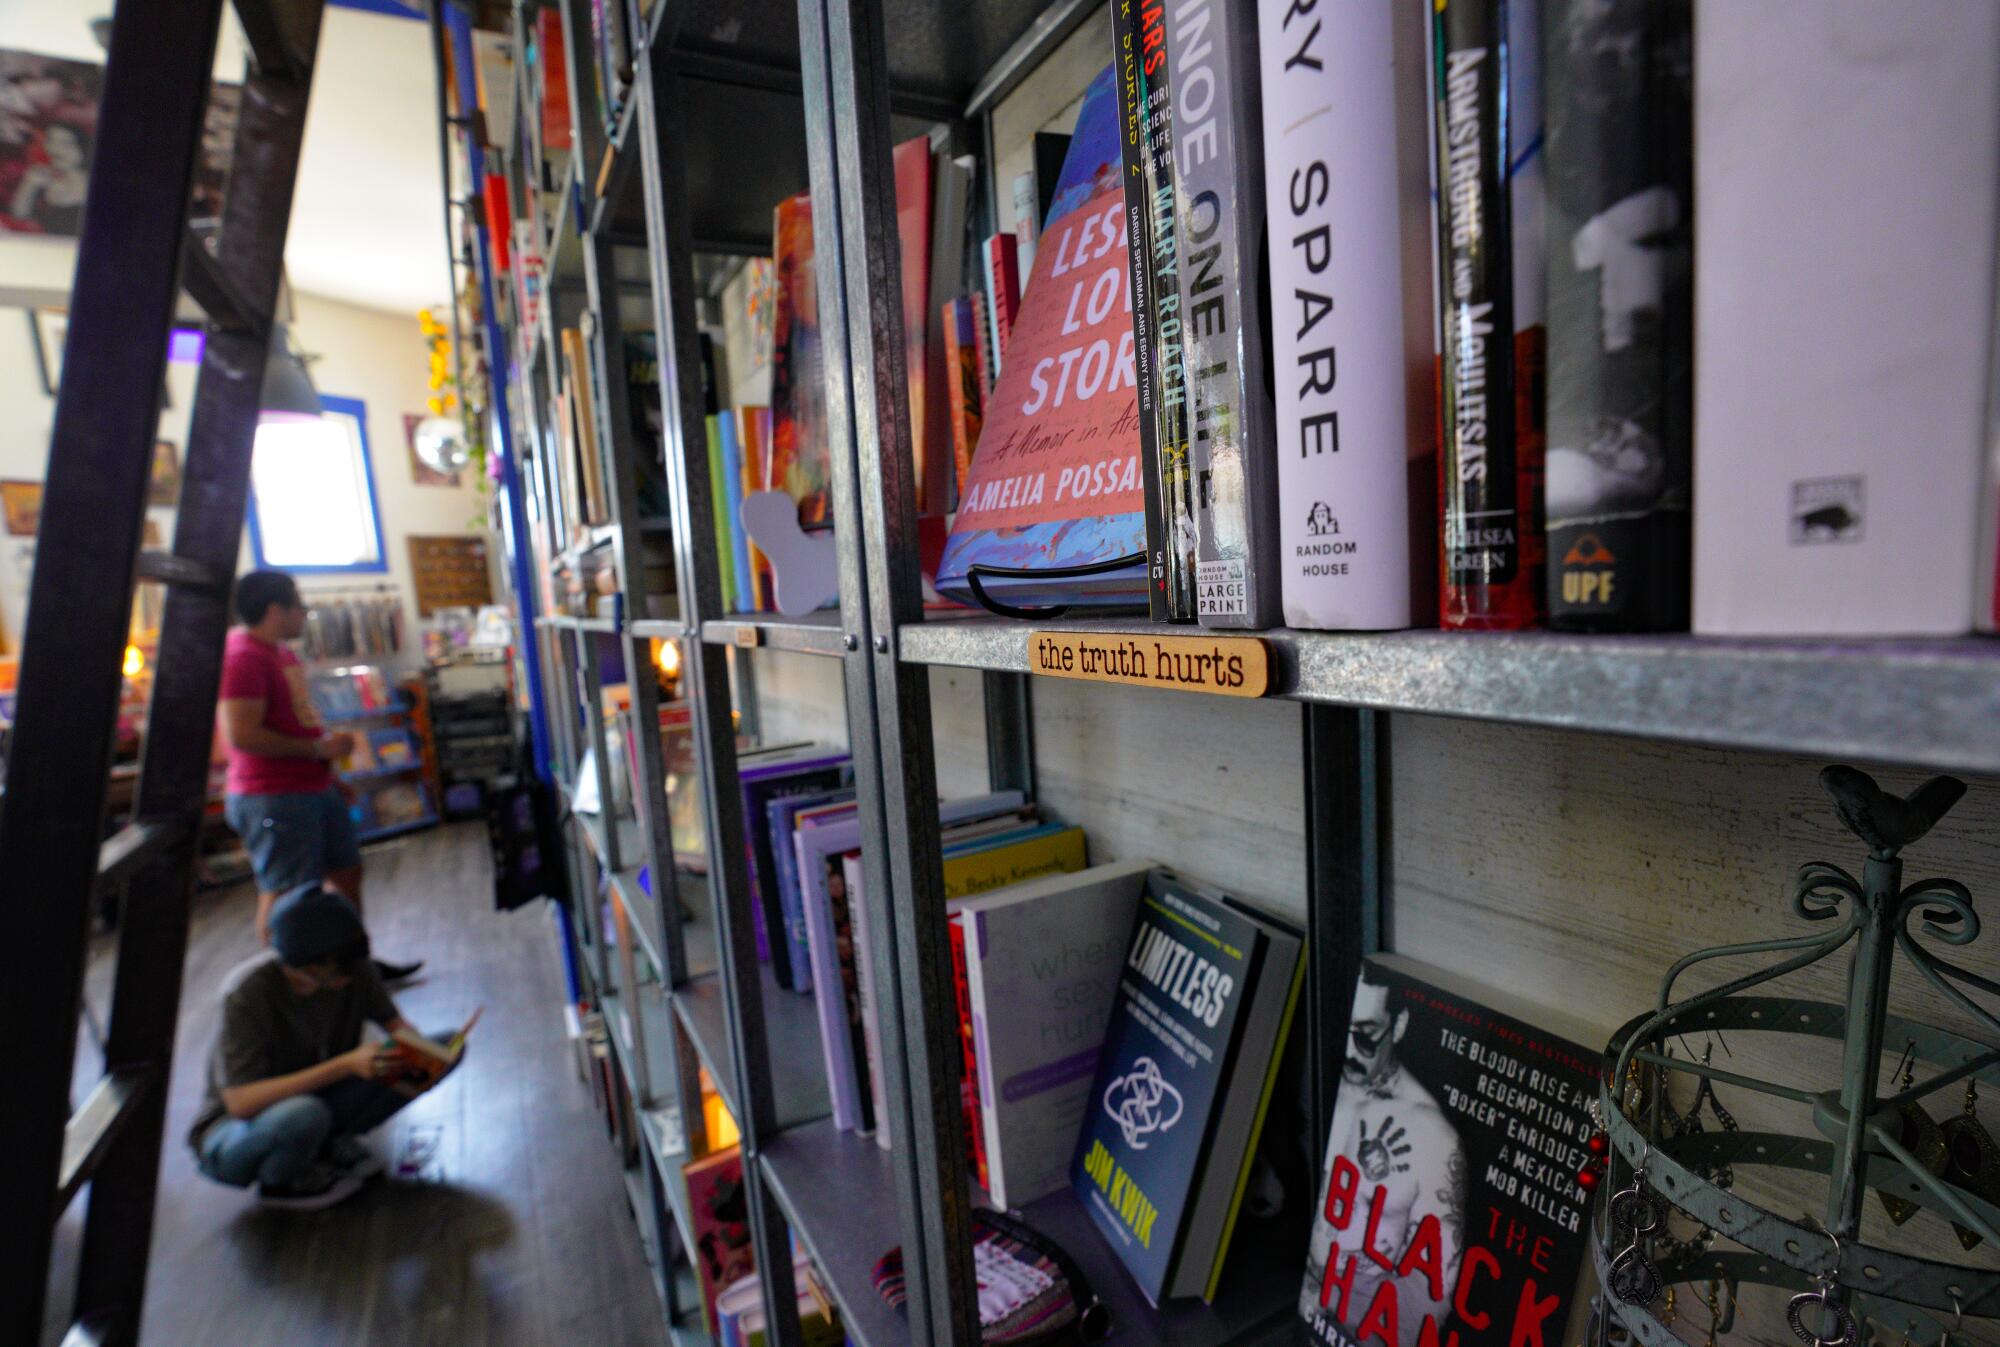 Book shelving labels at the Libélula bookstore, a 700-square-foot space in the Barrio Logan Community in San Diego, CA.